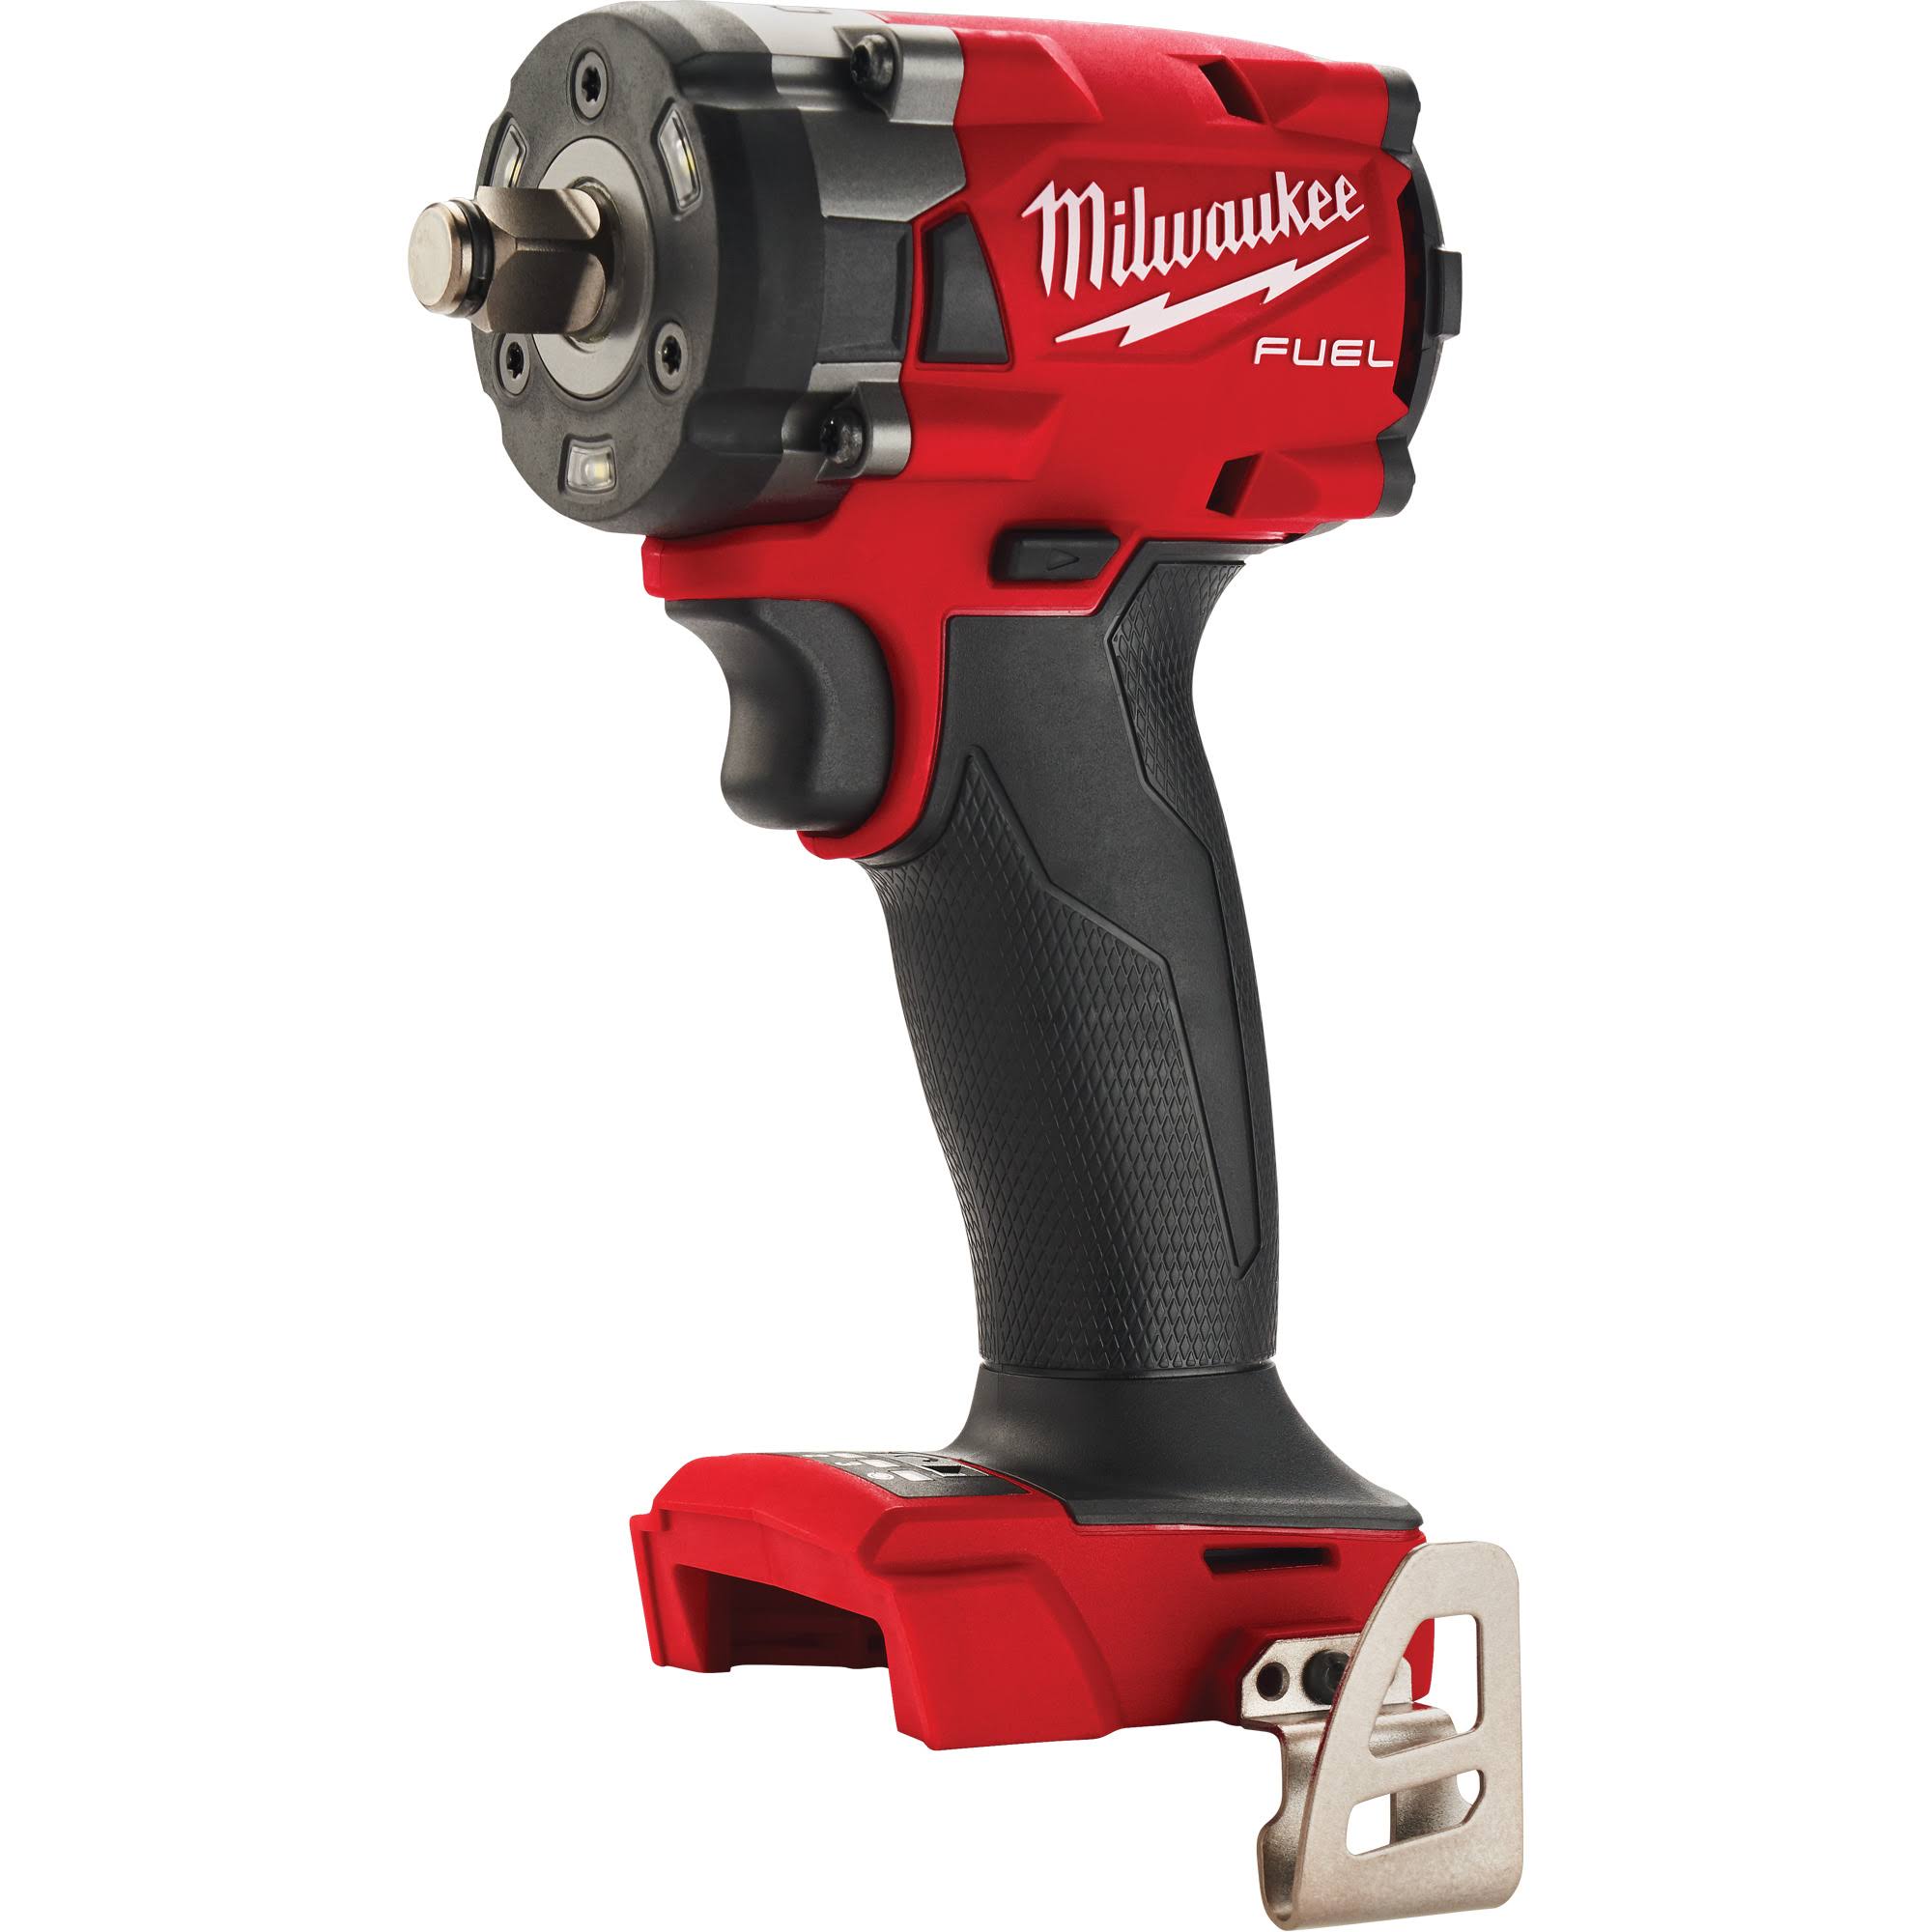 Milwaukee 2855-20 M18 FUEL 1/2" Compact Impact Wrench w/ Friction Ring